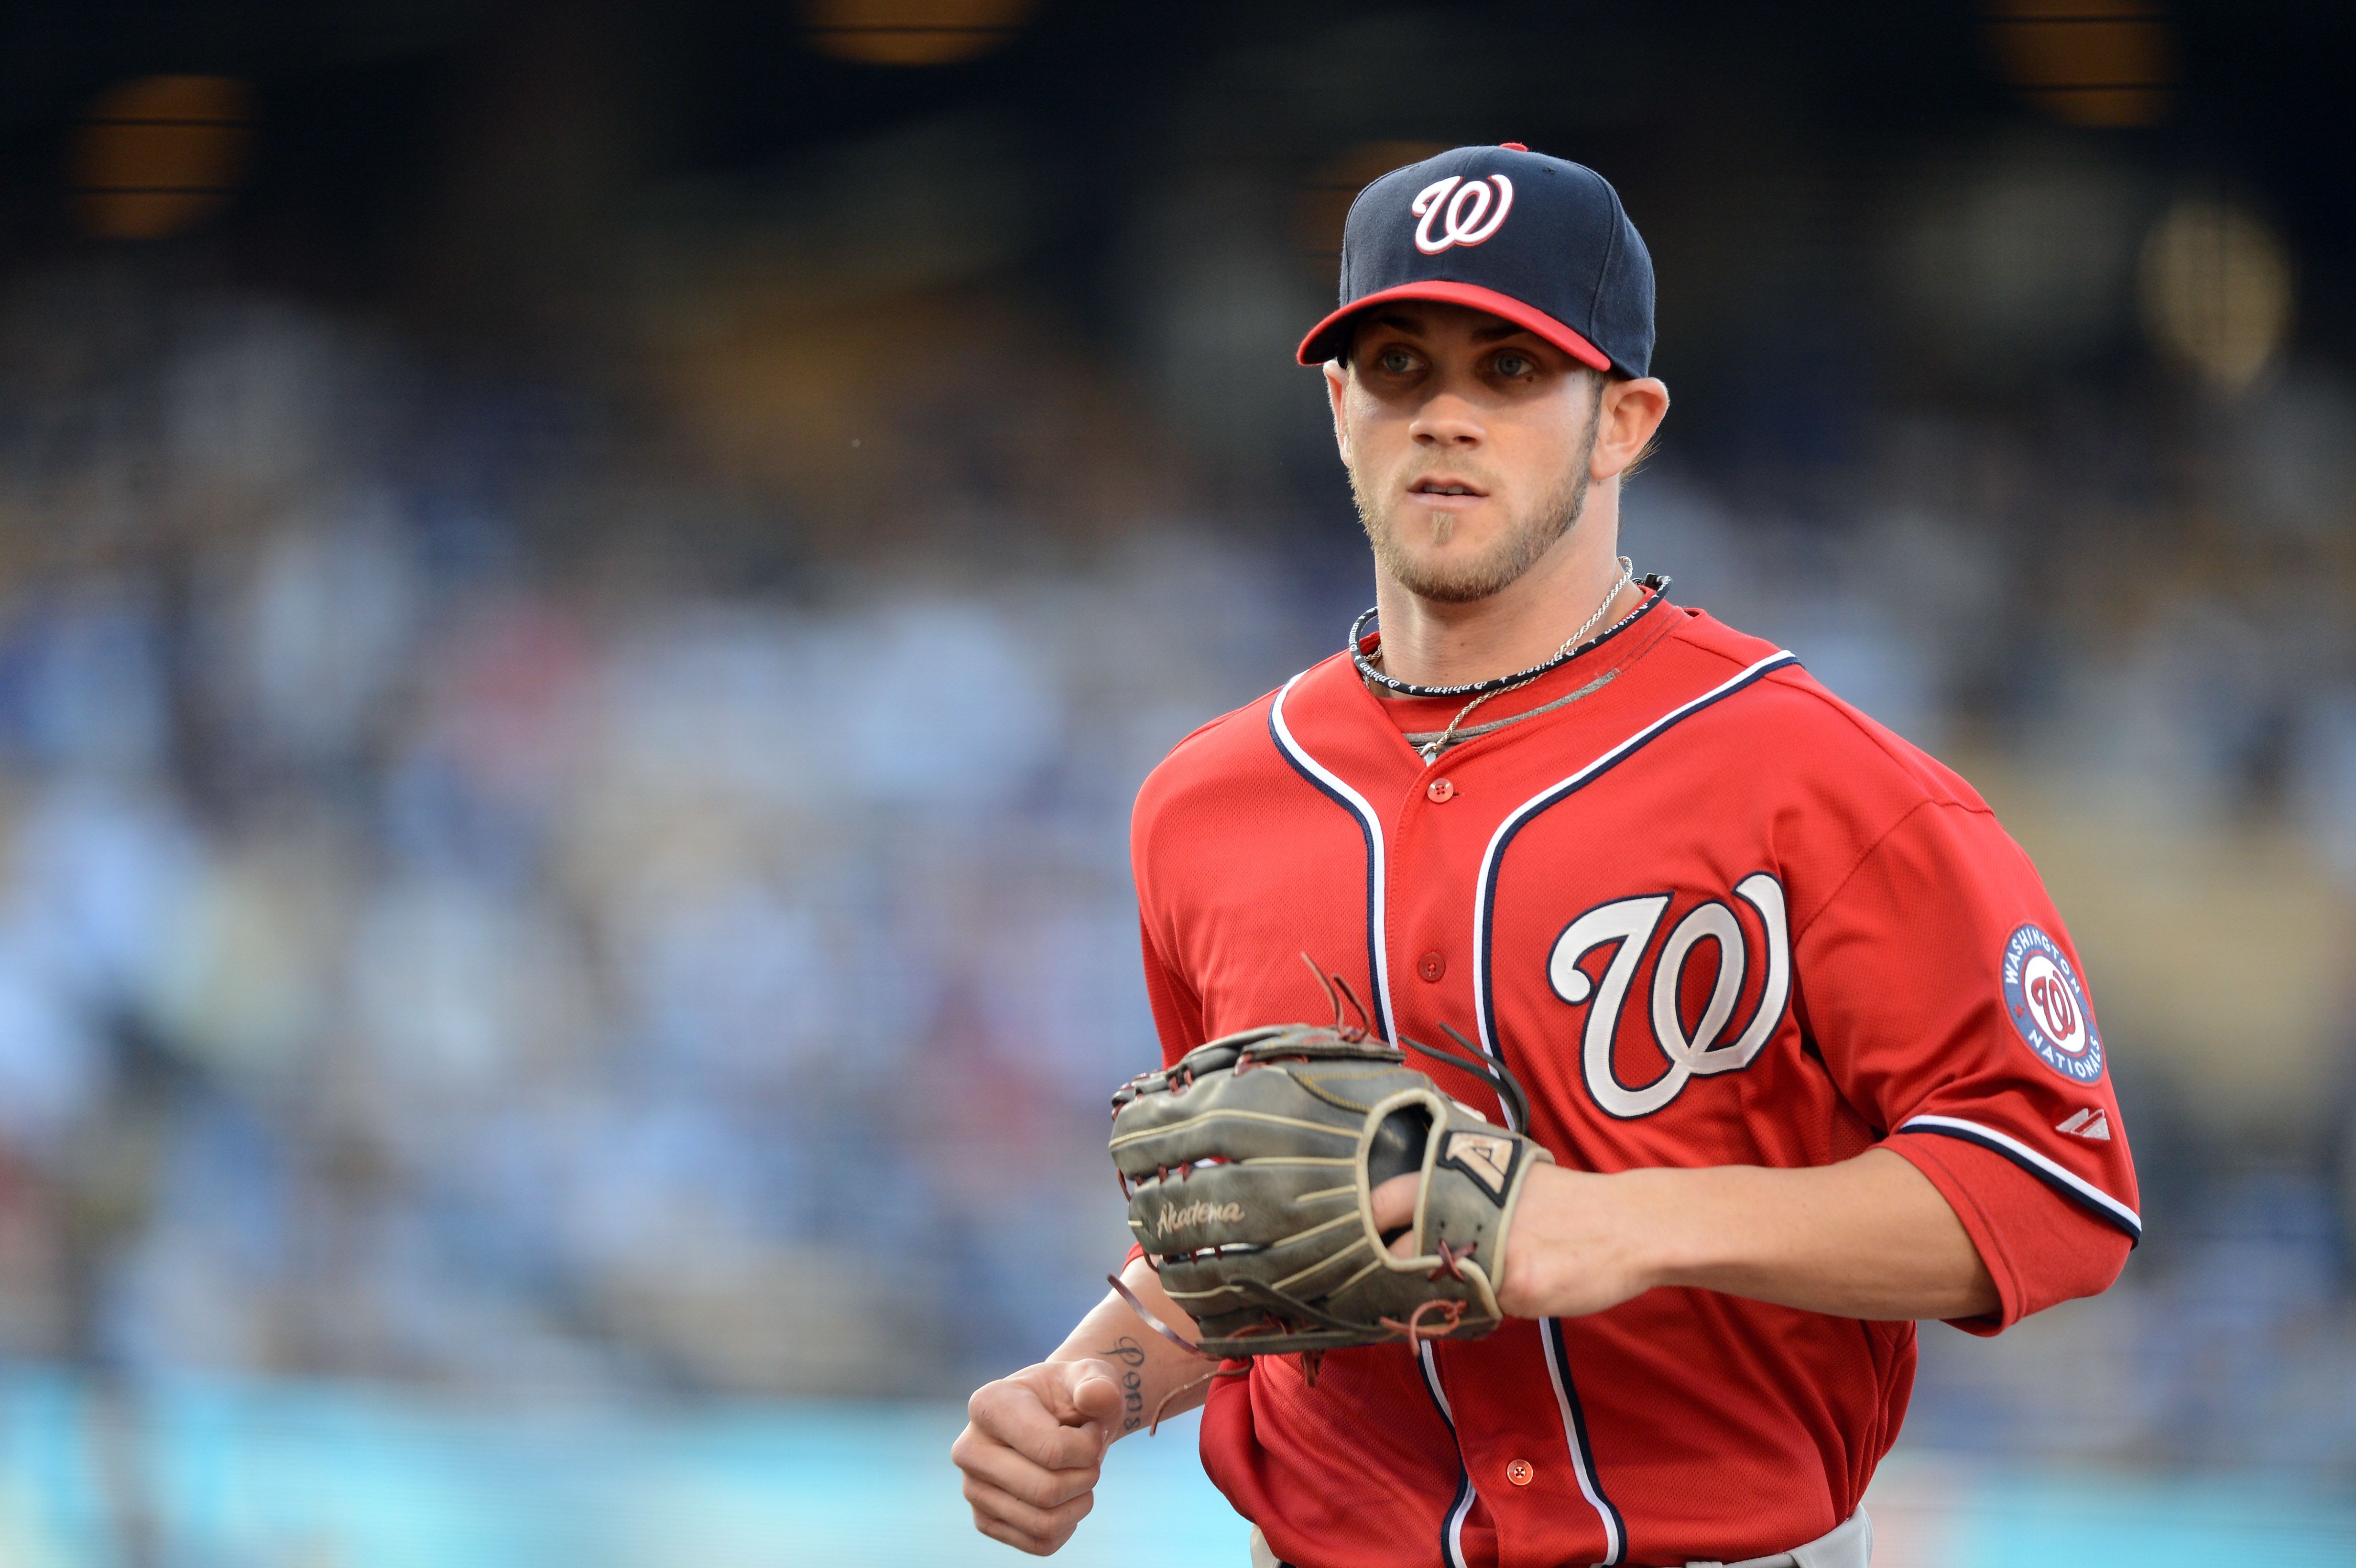 Washington Nationals Have Work To Do To Return To MLB Relevancy